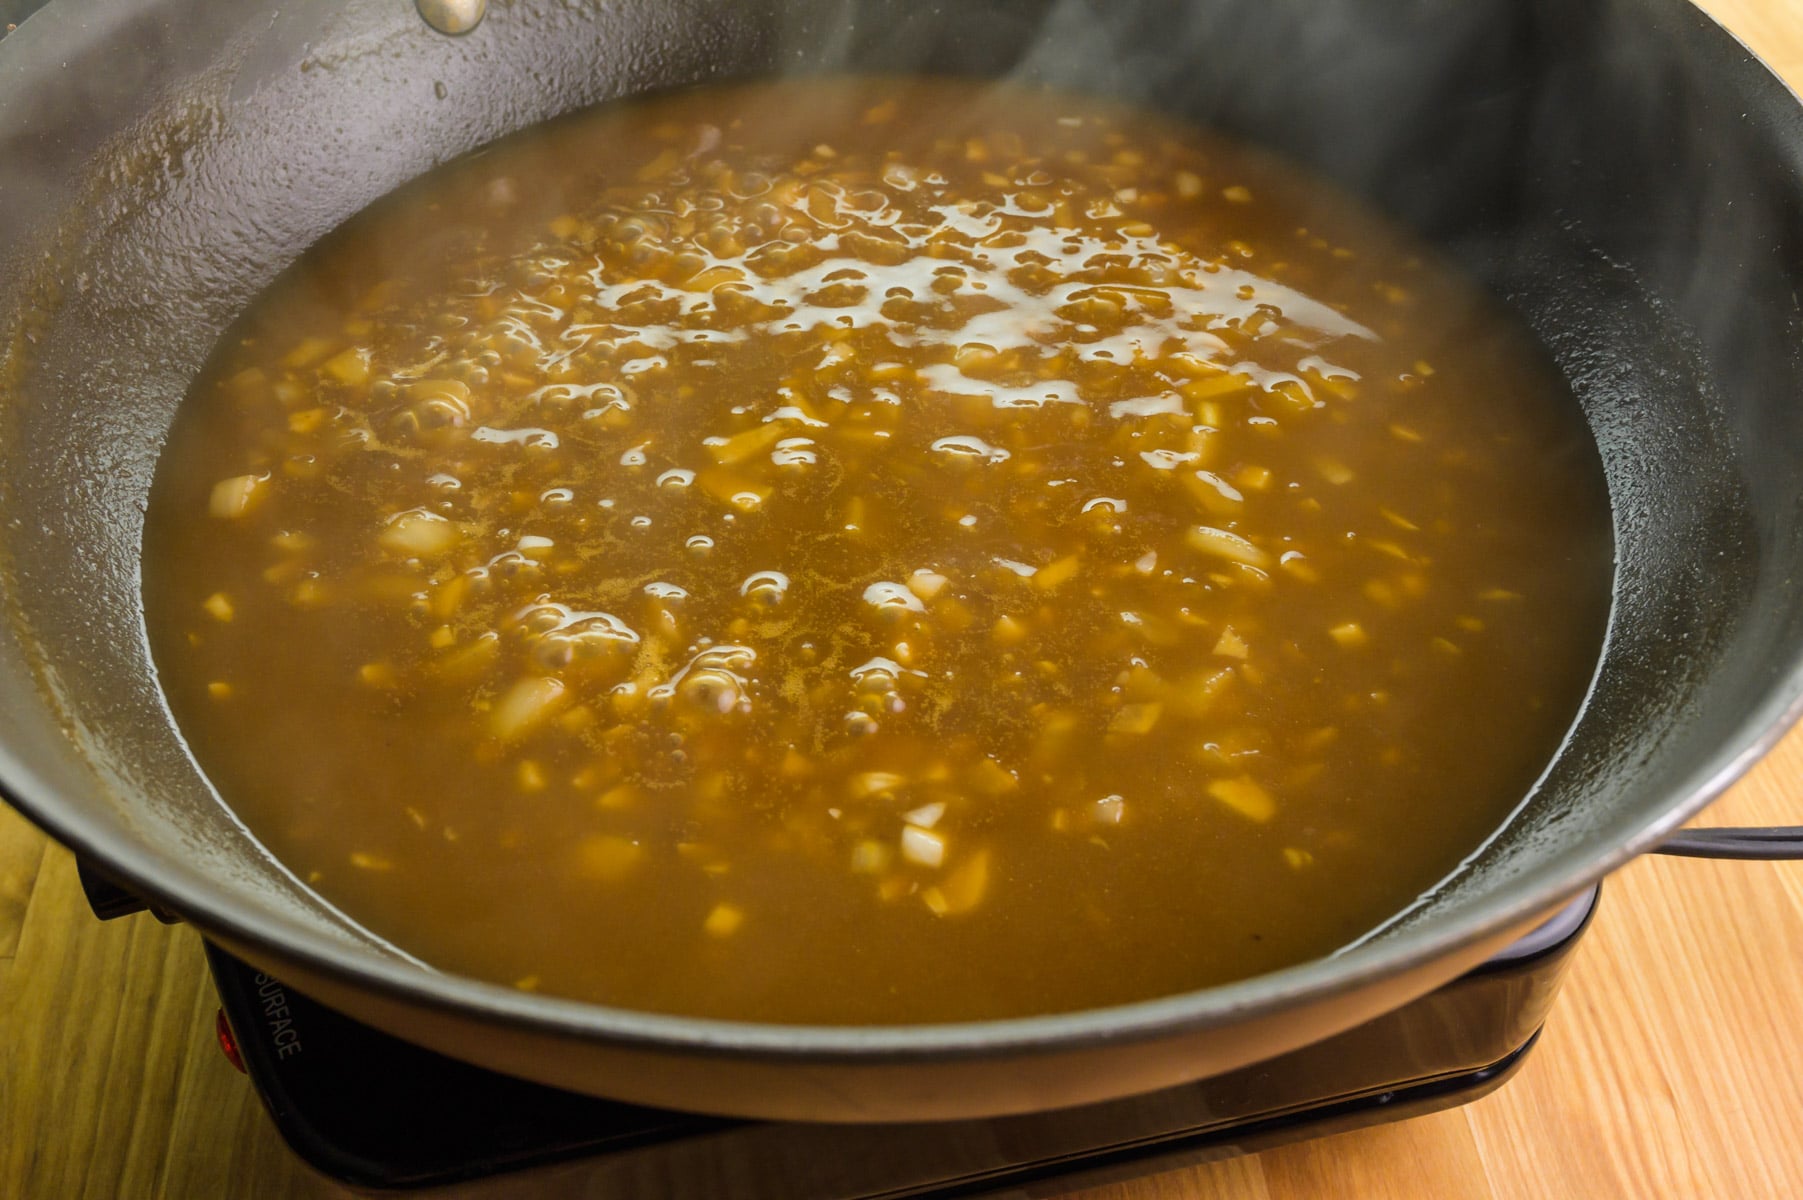 Sauce is being cooked in a skillet.